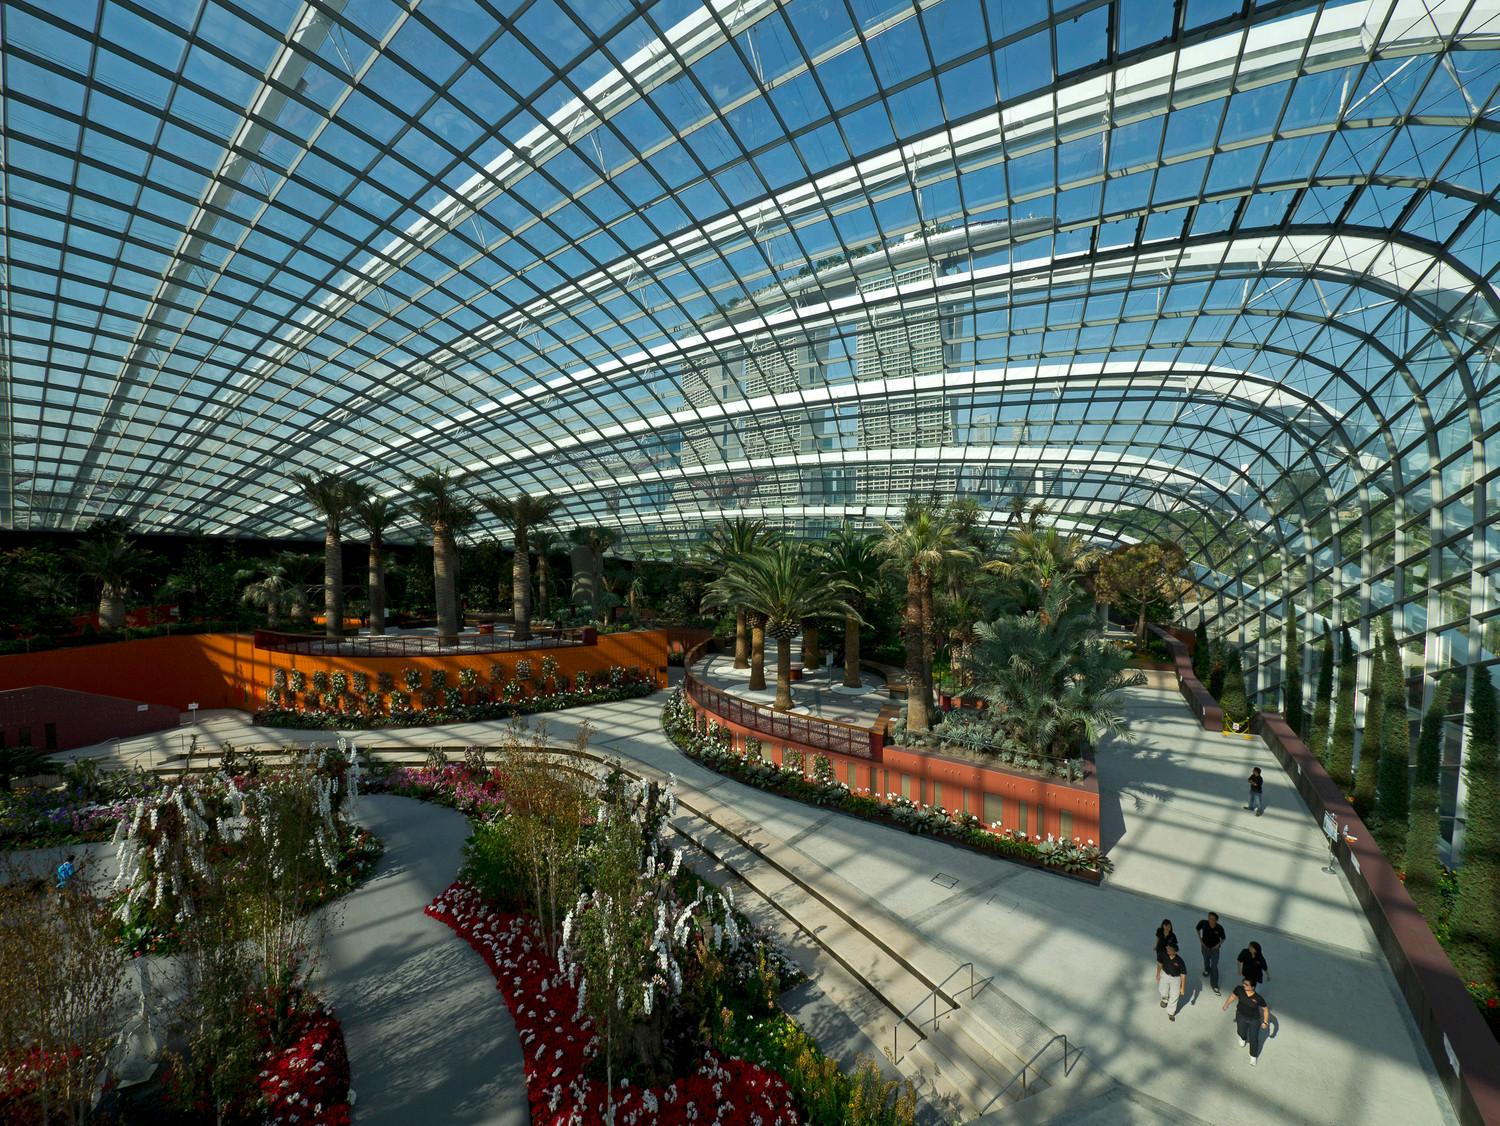 Cooled Conservatories, Gardens by the Bay - Internal view of Flower Dome